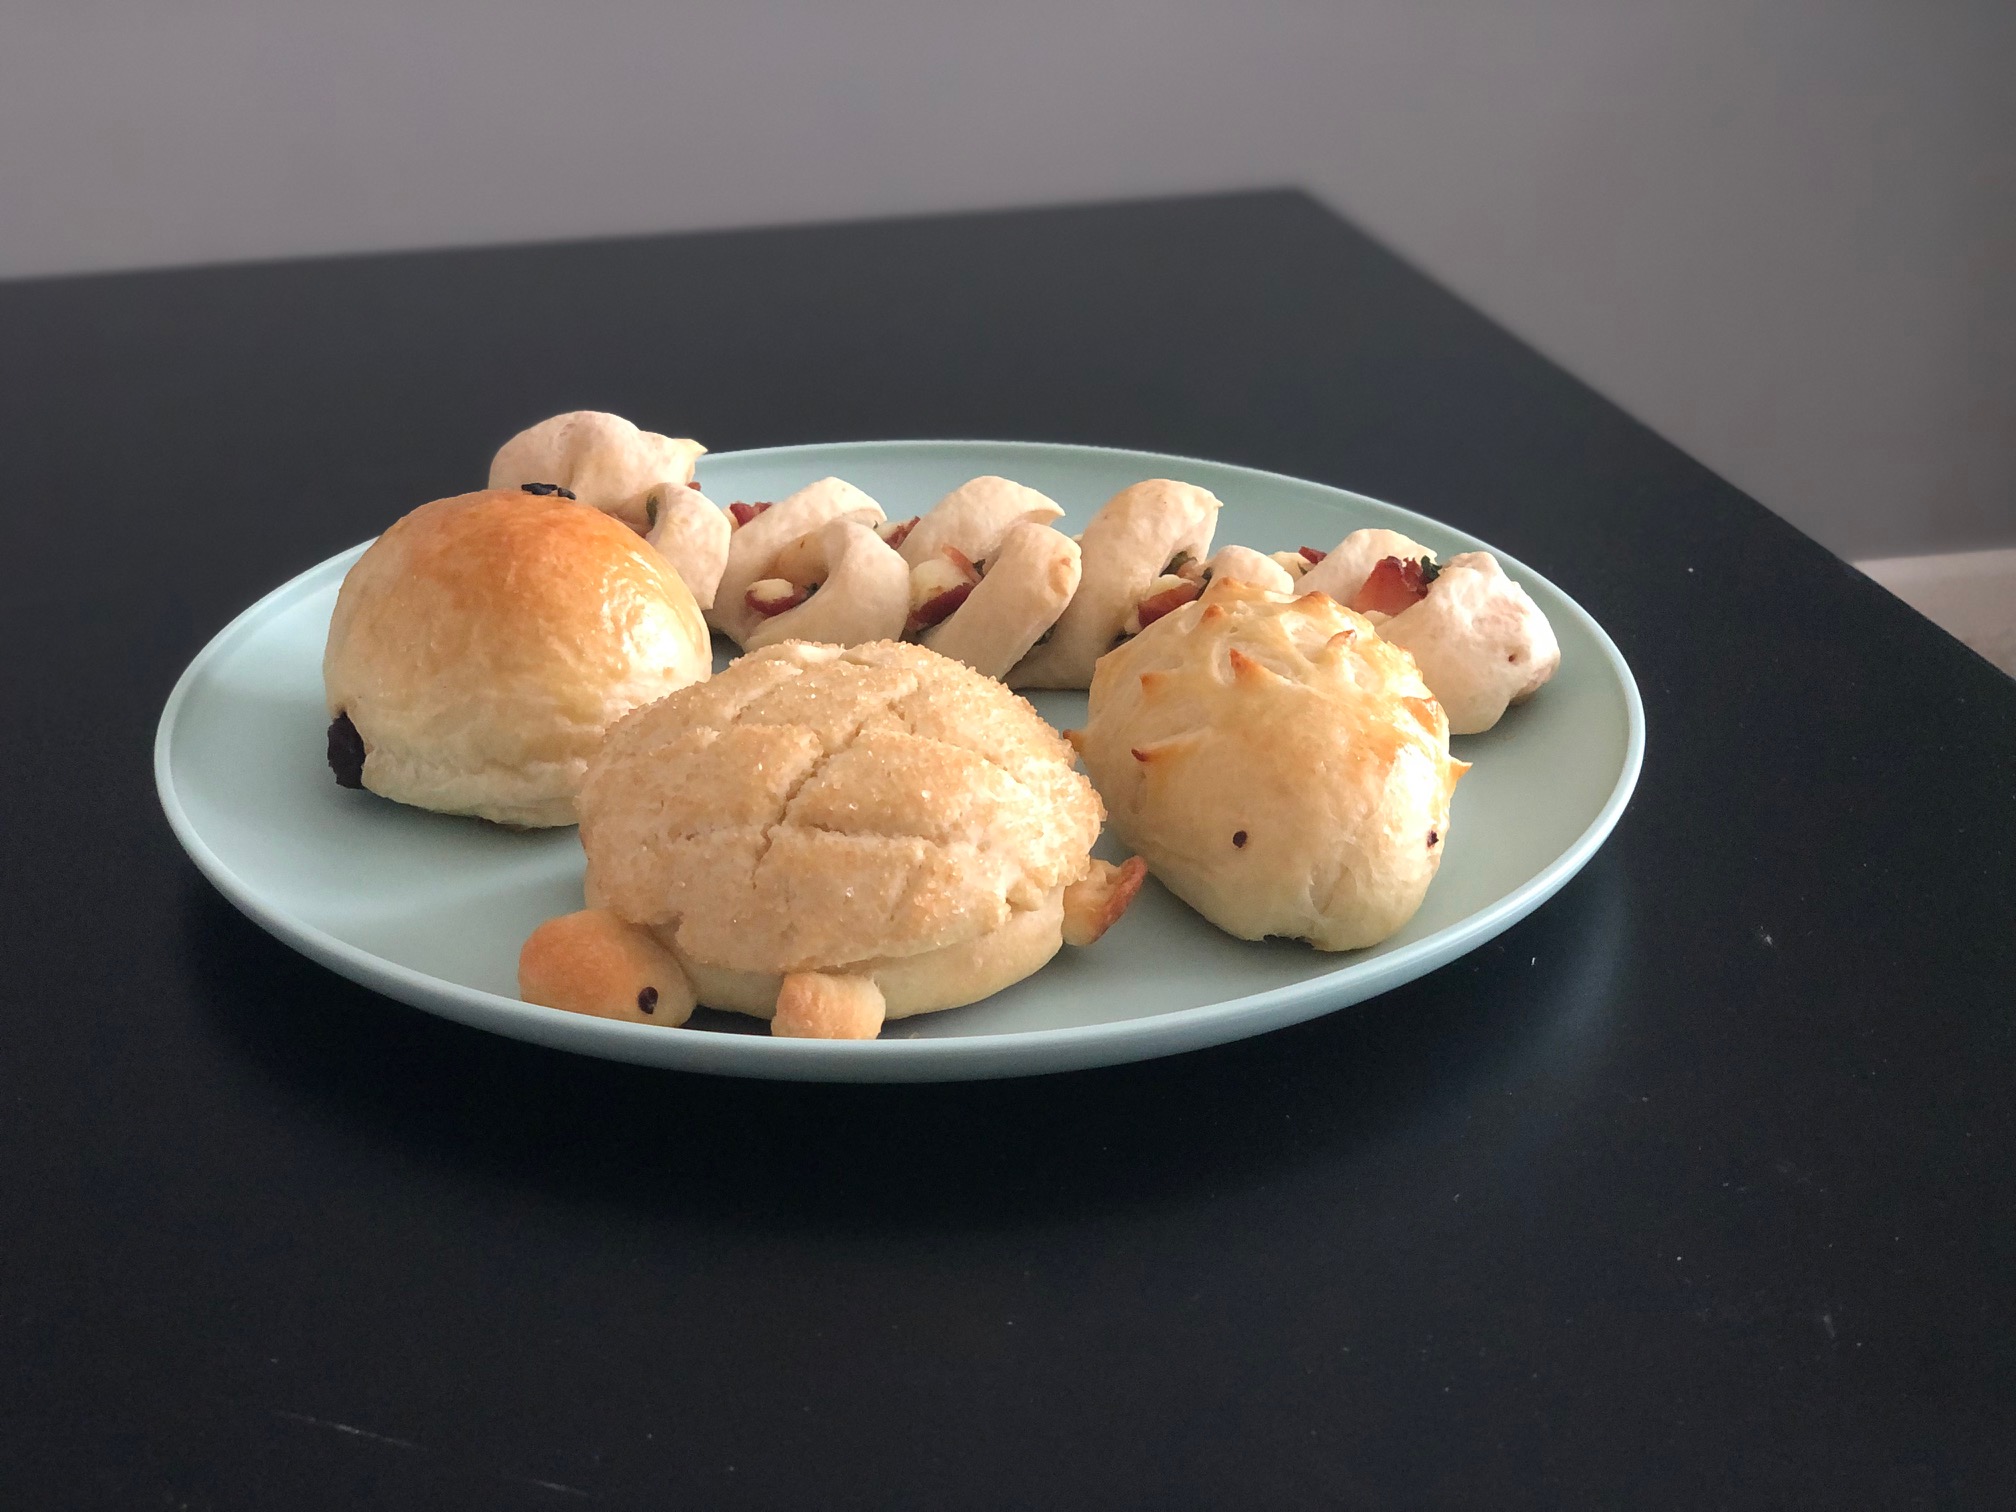 On a teal plate, there are several Japanese baked goods including two that are shaped like animals. Photo by Alyssa Buckley.